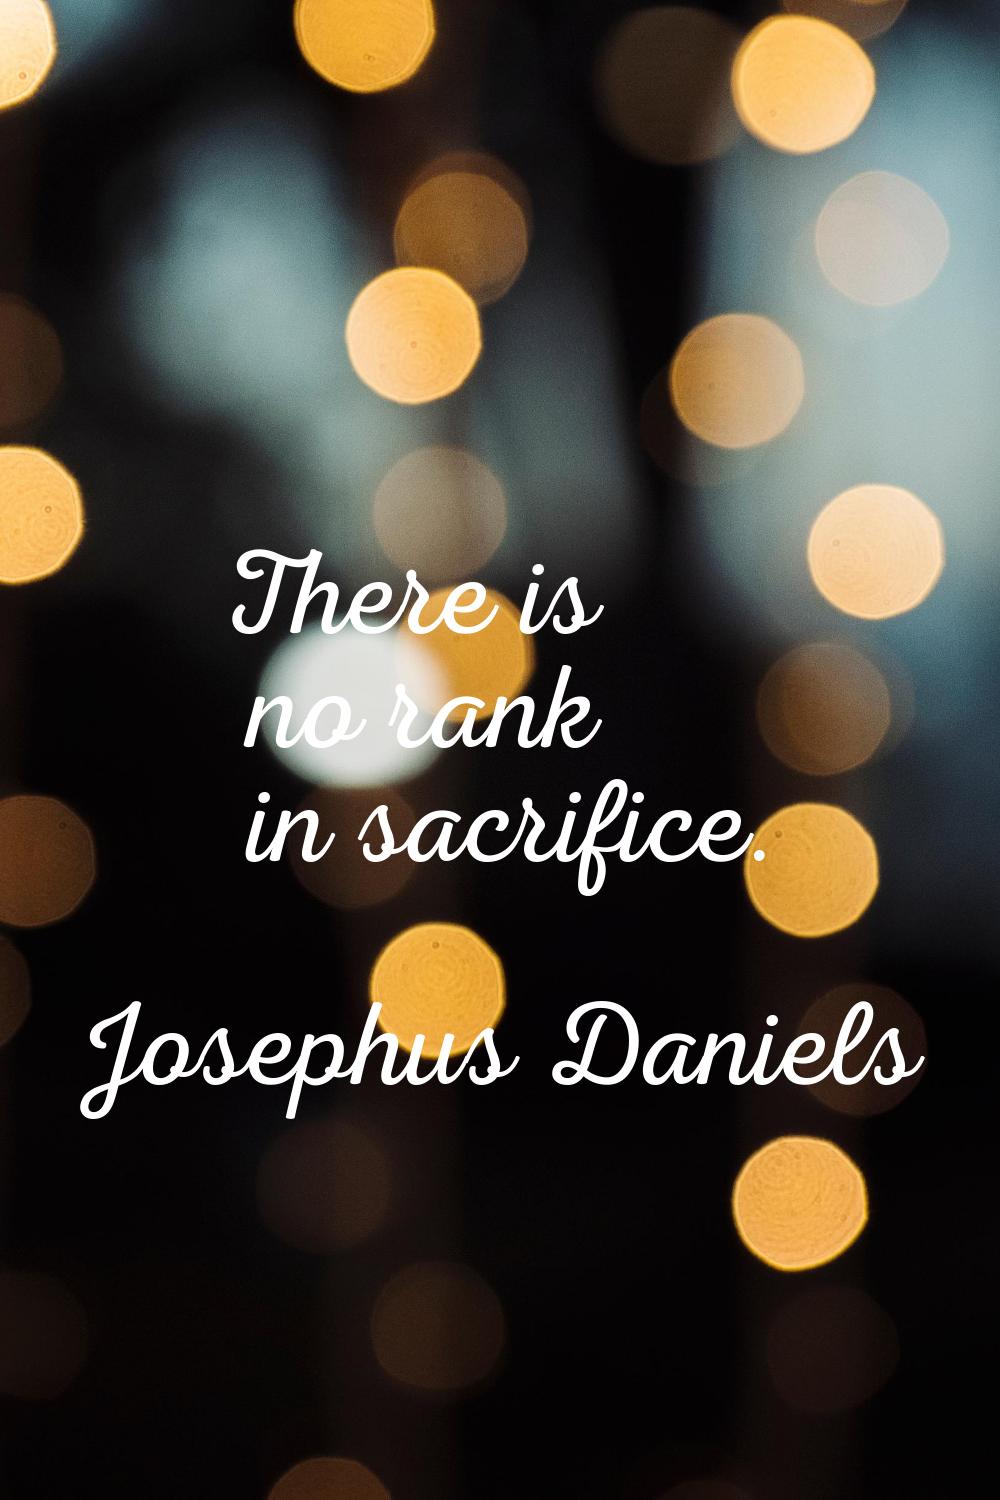 There is no rank in sacrifice.